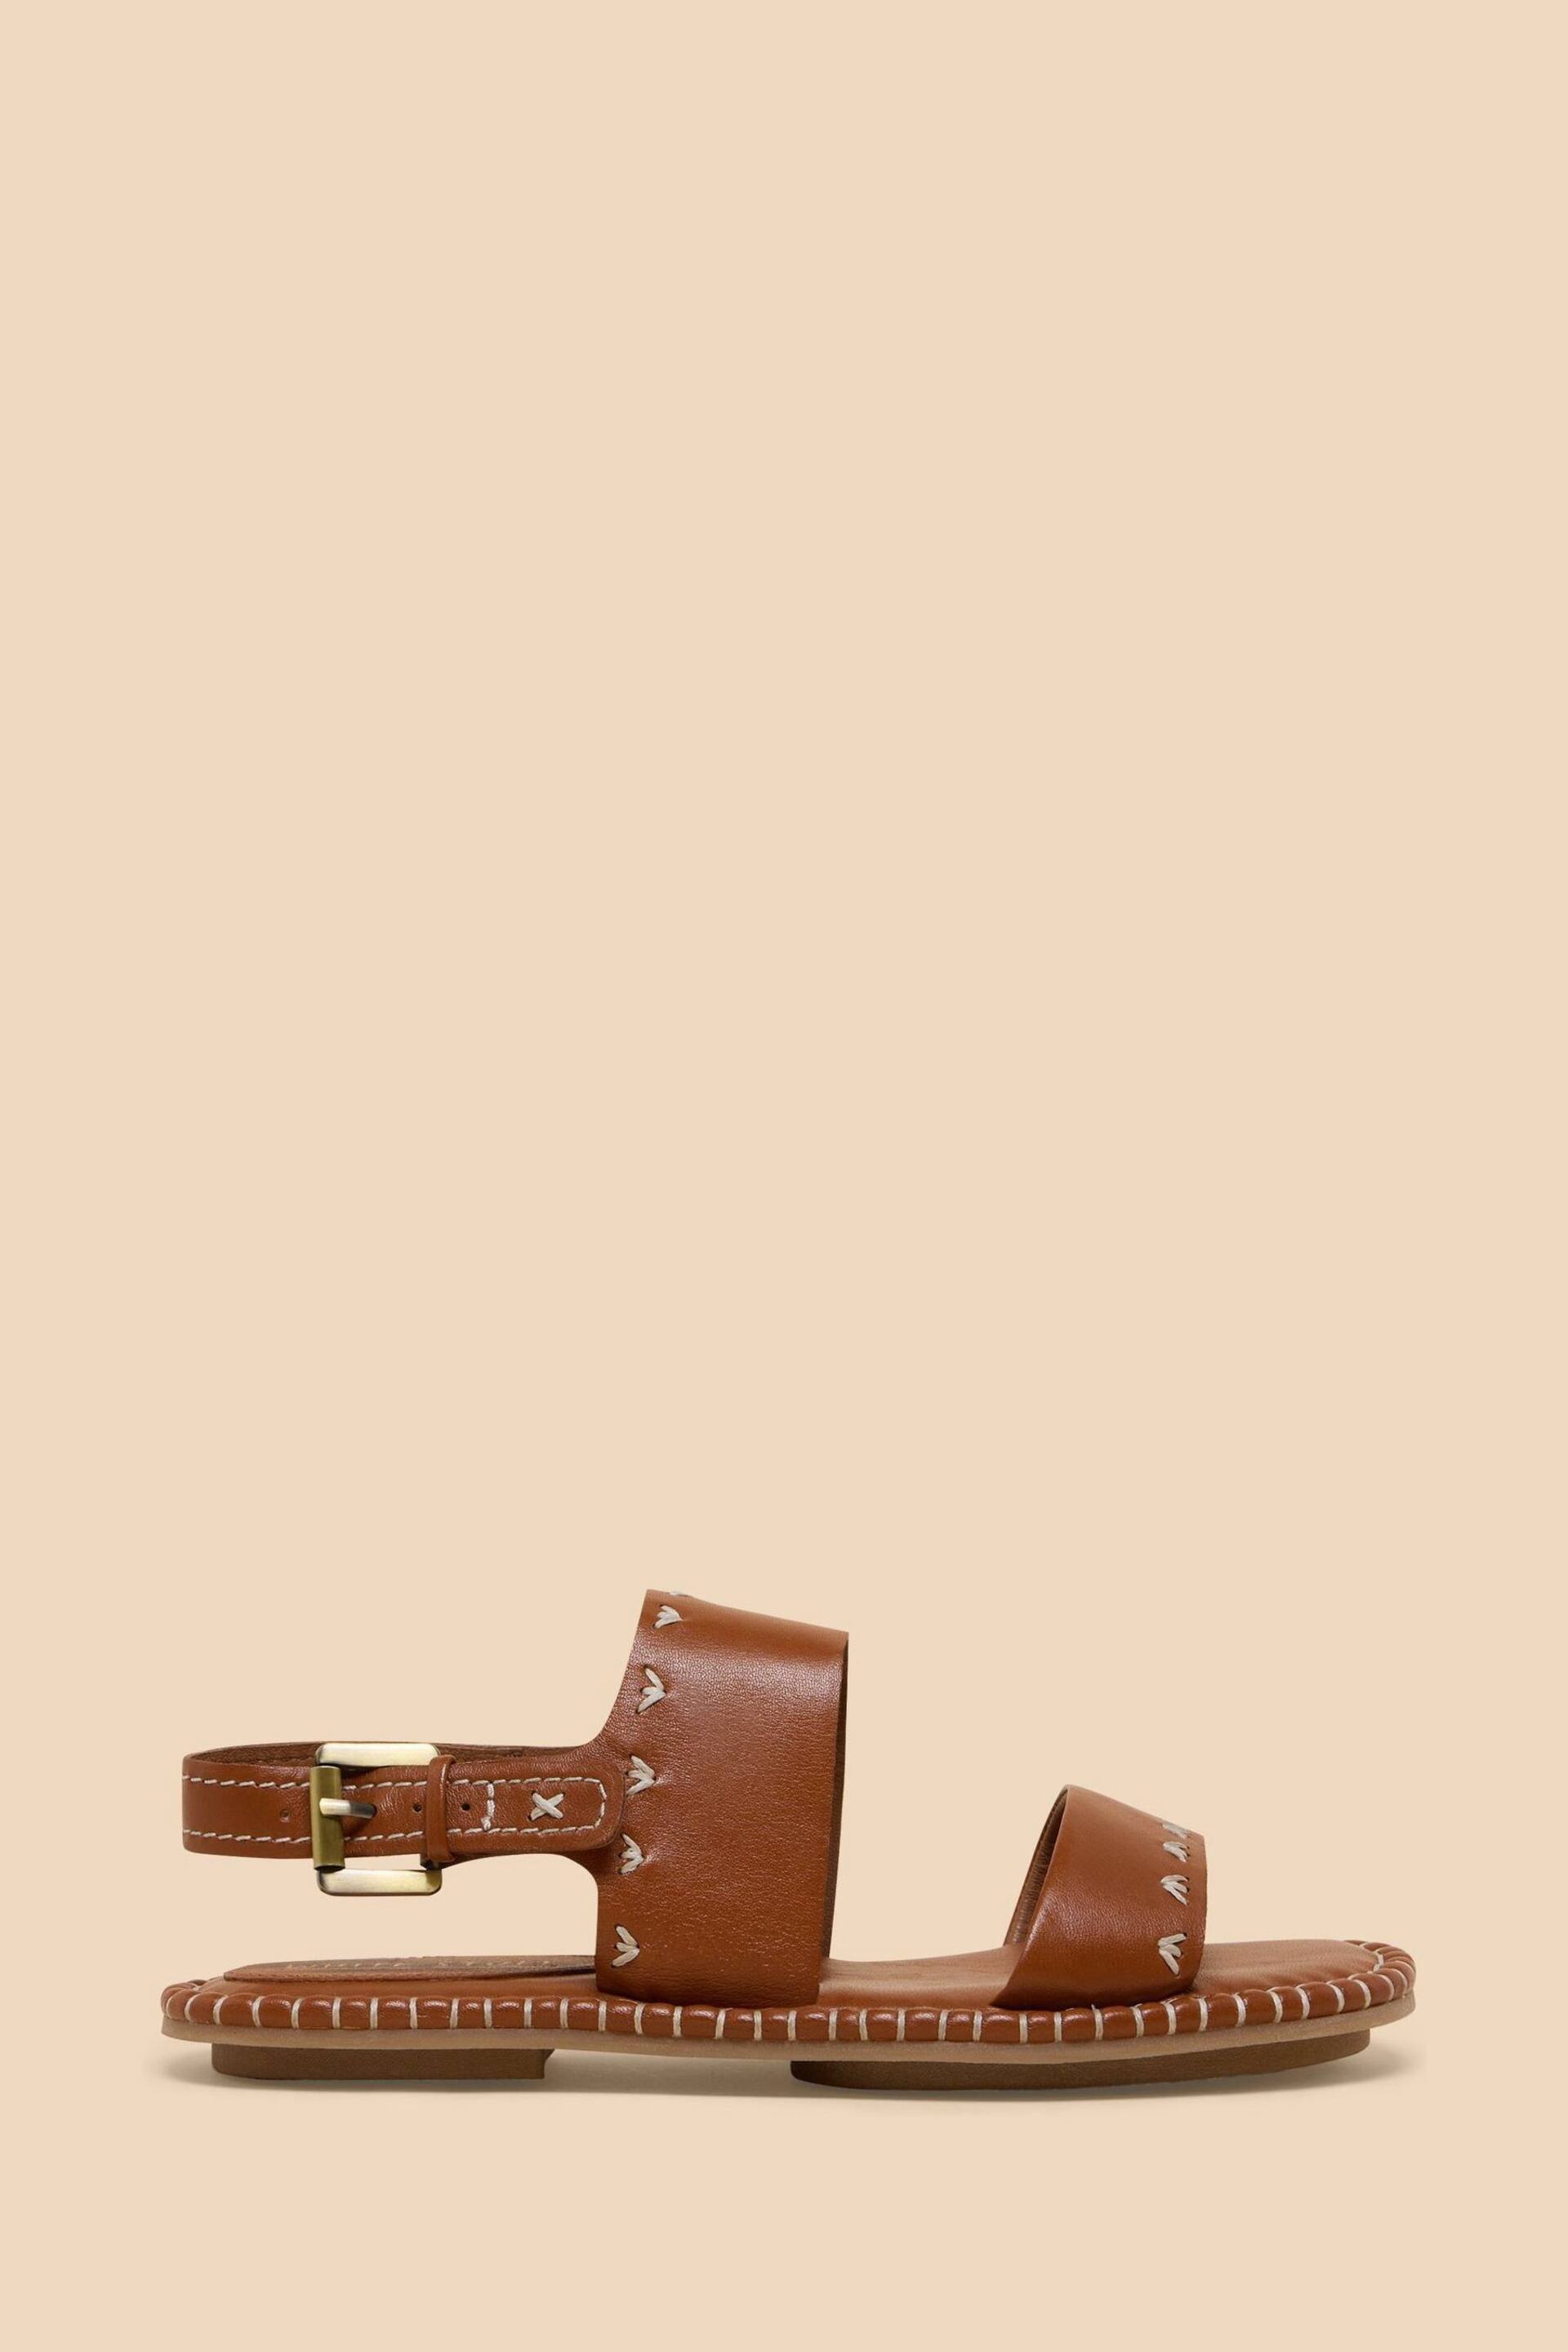 White Stuff Brown Sweetpea Leather Sandals - Image 1 of 4